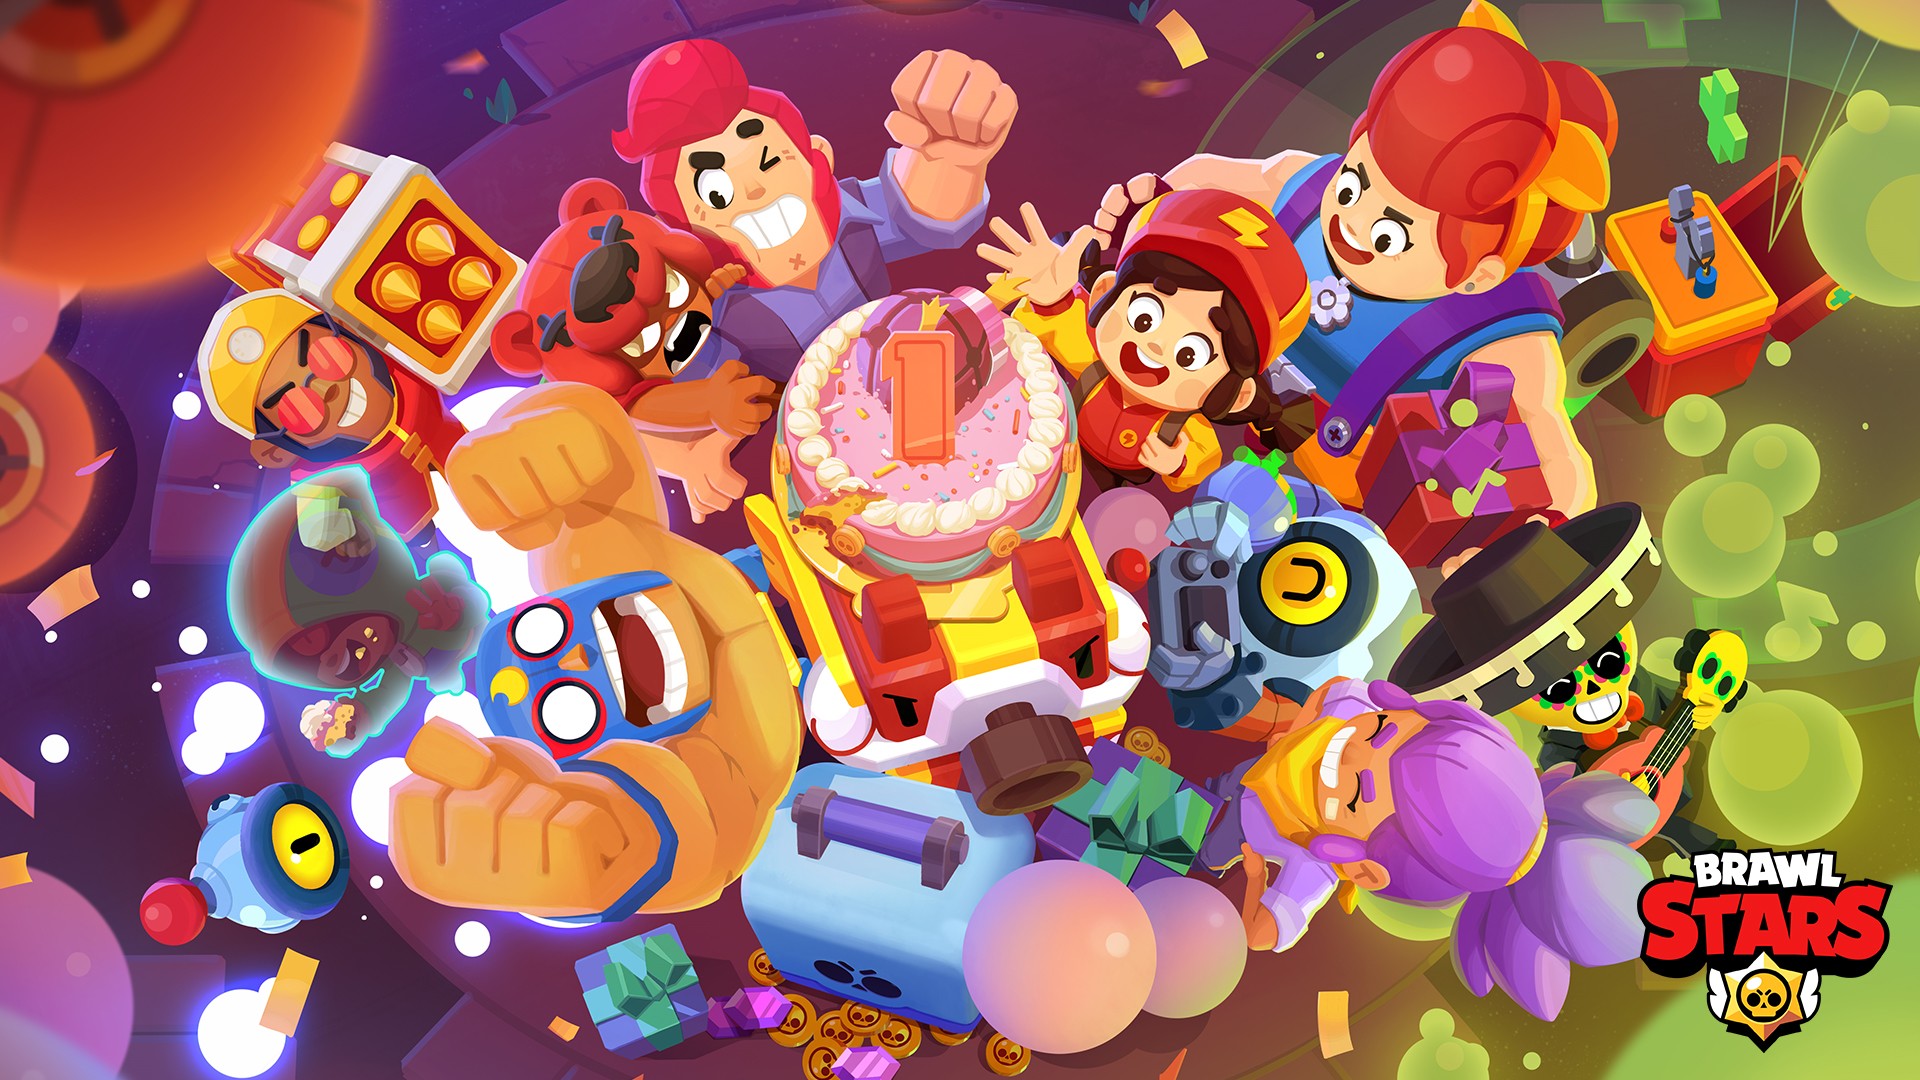 Free Boxes And Skins Up For Grabs In Brawl Stars To Celebrate One Year Anniversary Of China Release Dot Esports - skin brawl stars gratuit 2021